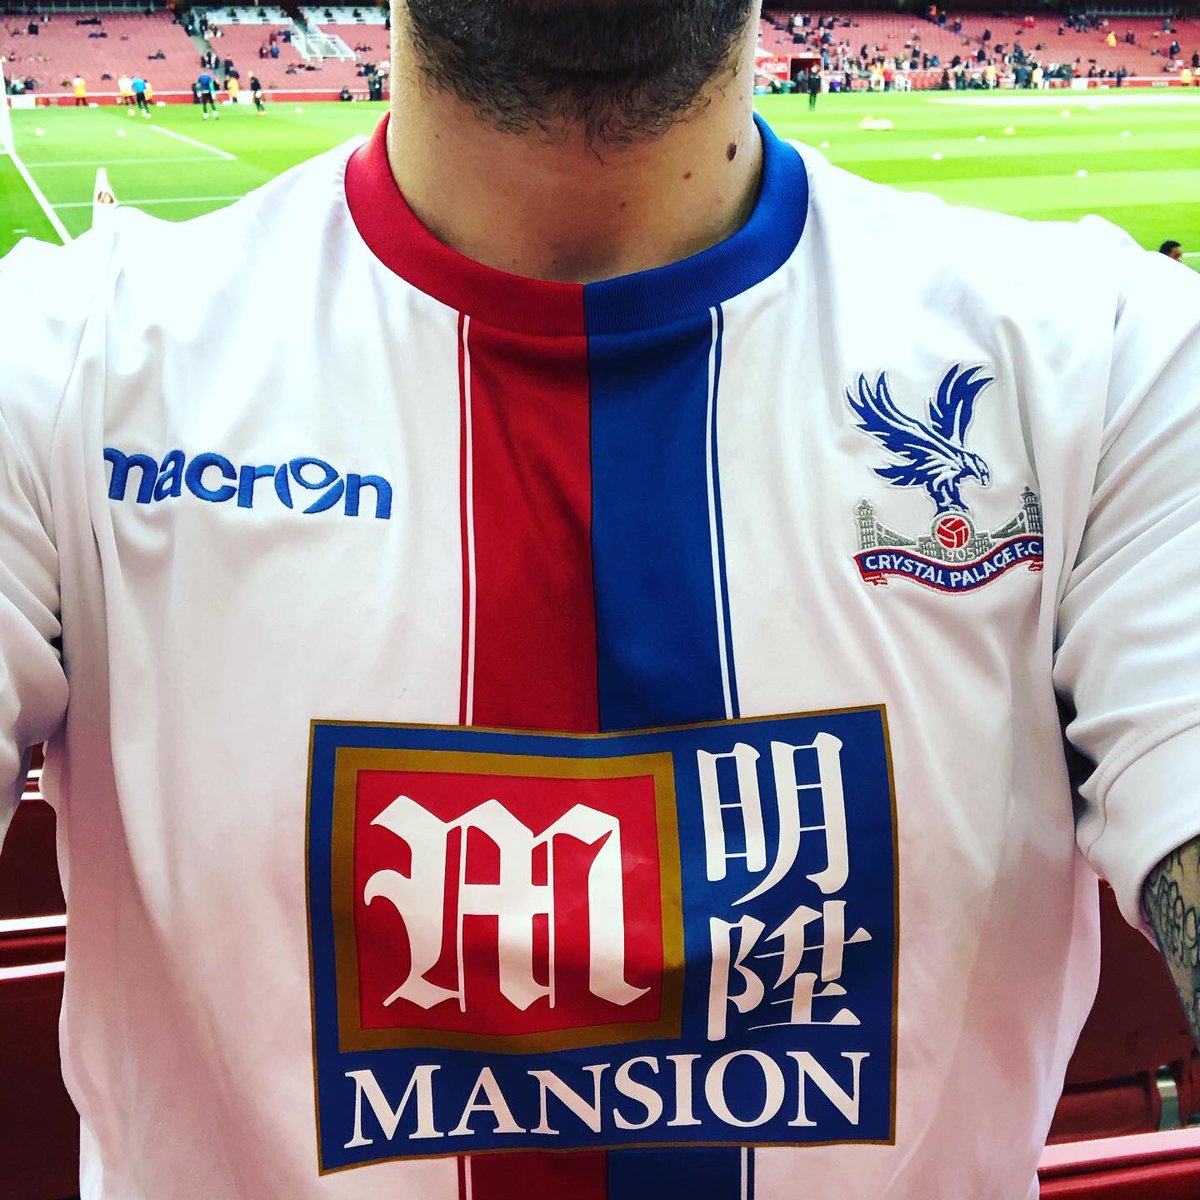  @CPFC Away Kit, 2015/16MacronThis particular shirt is the first  #CrystalPalace shirt I got, in the year I started supporting them. To this day, I regret not having personalised it with Yannick Bolasie’s name.